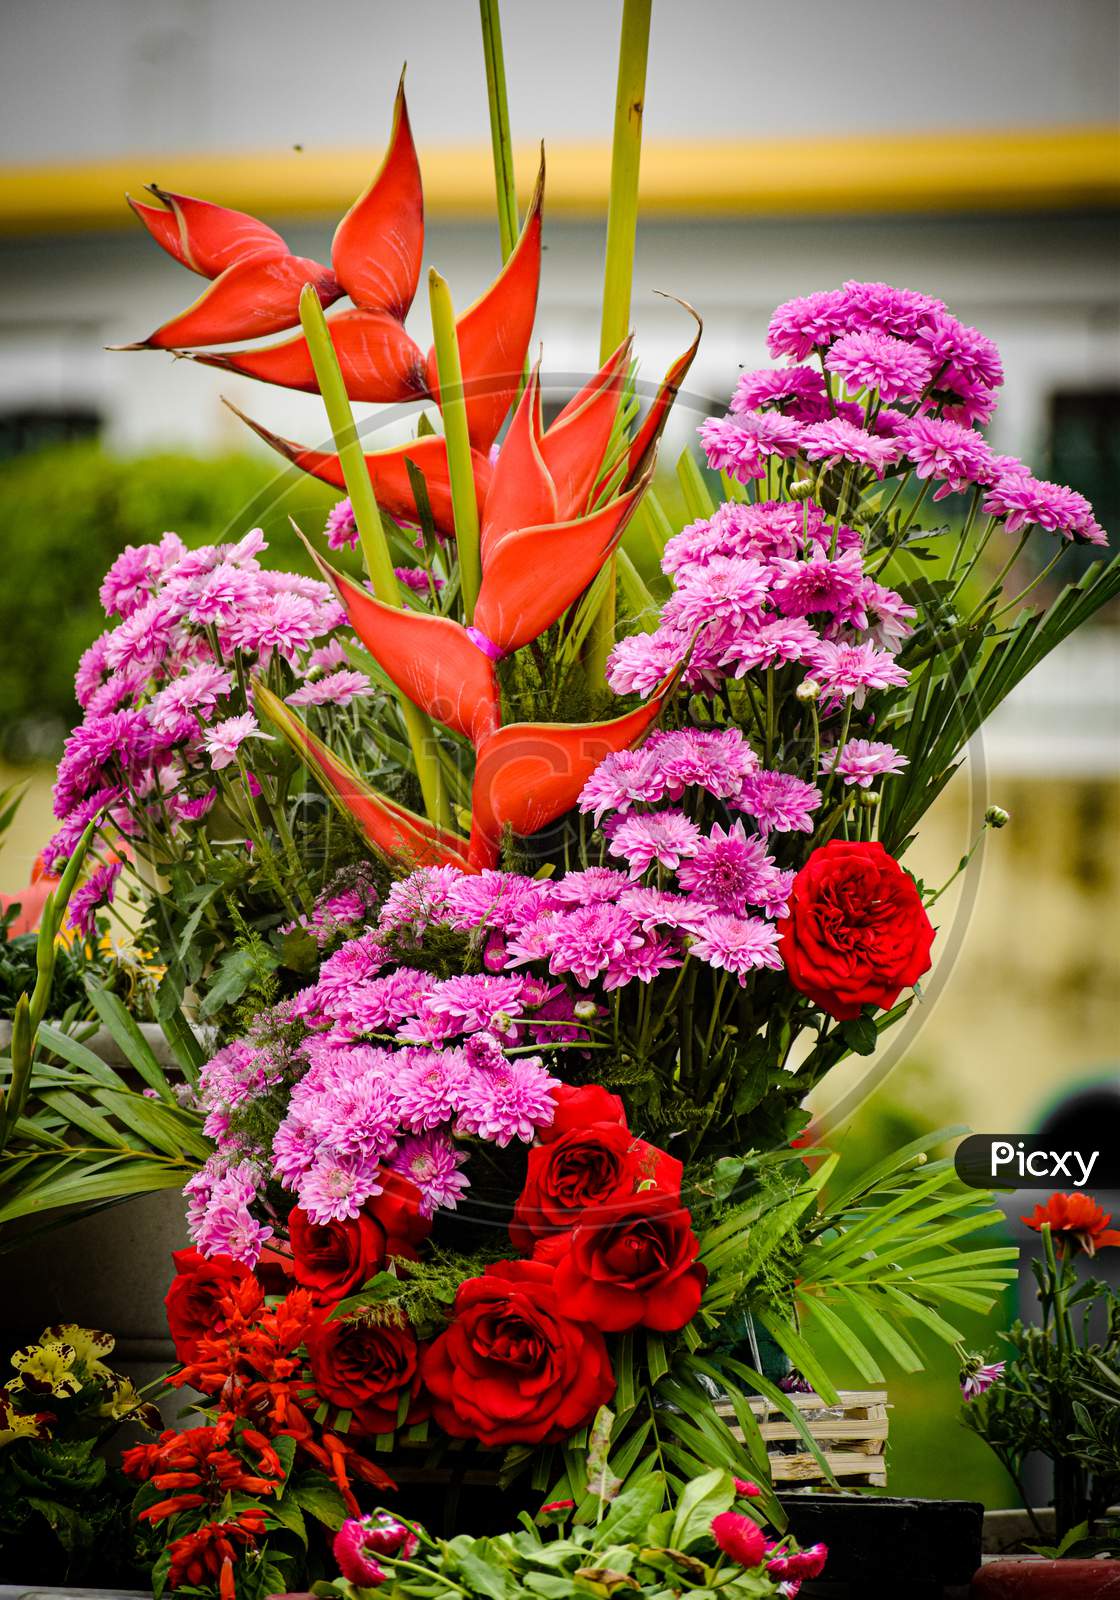 Bouquet of colourful flowers